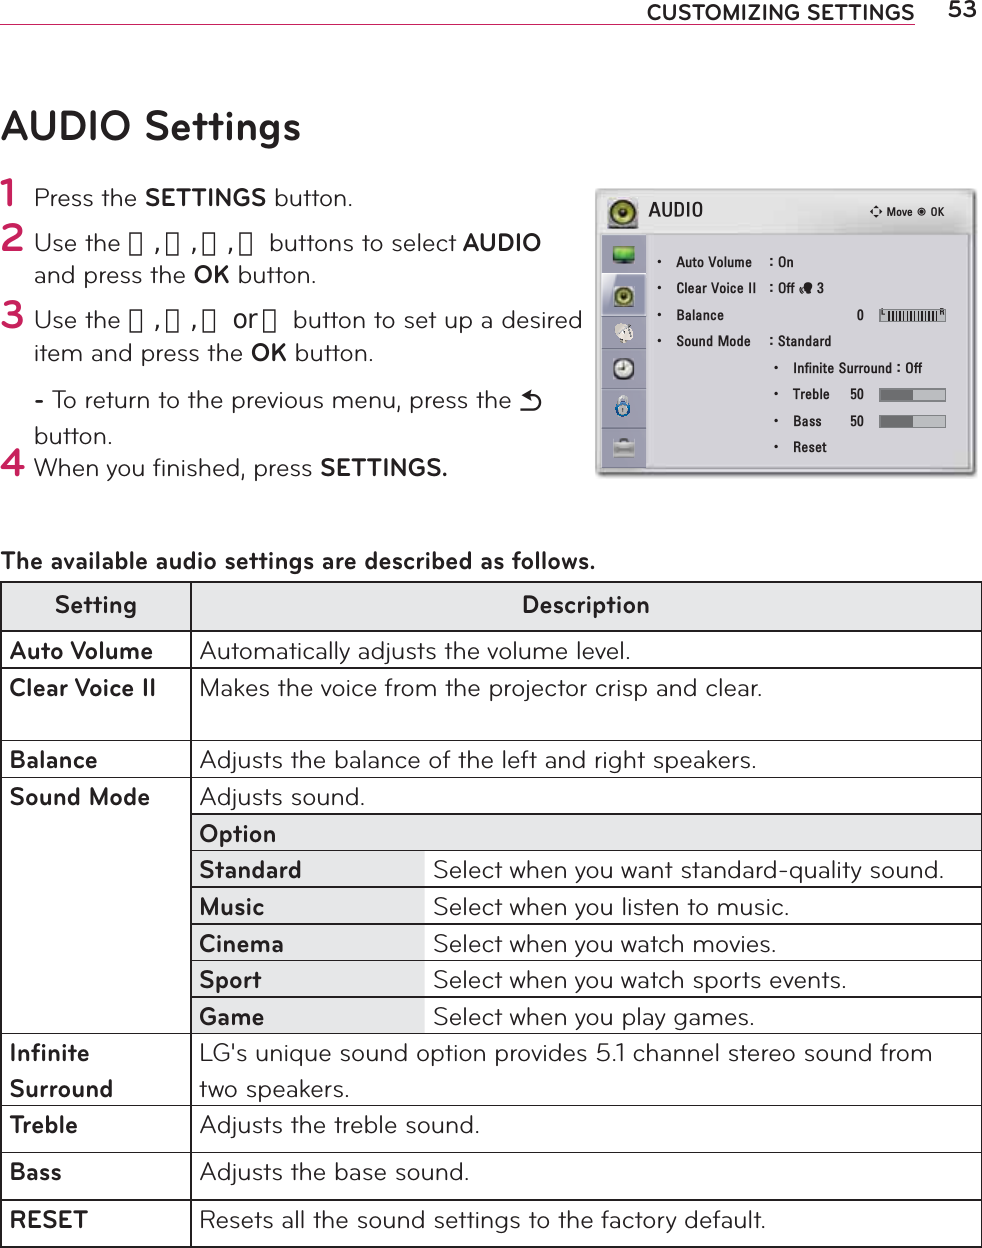 53CUSTOMIZING SETTINGSAUDIO Settings1 Press the SETTINGS button.2 Use the 󱛨, 󱛩, 󱛦, 󱛧 buttons to select AUDIO and press the OK button.3 Use the 󱛨, 󱛩, 󱛦 or 󱛧 button to set up a desired item and press the OK button.- To return to the previous menu, press the ᰳ button.4 When you ﬁnished, press SETTINGS.The available audio settings are described as follows.Setting DescriptionAuto Volume Automatically adjusts the volume level.Clear Voice II Makes the voice from the projector crisp and clear.Balance Adjusts the balance of the left and right speakers.Sound Mode Adjusts sound.OptionStandard Select when you want standard-quality sound.Music Select when you listen to music.Cinema Select when you watch movies.Sport Select when you watch sports events.Game Select when you play games.Inﬁnite  SurroundLG&apos;s unique sound option provides 5.1 channel stereo sound from two speakers.Treble Adjusts the treble sound.Bass Adjusts the base sound.RESET Resets all the sound settings to the factory default.ᯒ0RYHᯙ2.$8&apos;,2ؒ $XWR9ROXPH 2Qؒ &amp;OHDU9RLFH,, 2IIᰕؒ %DODQFH   / 5ؒ 6RXQG0RGH 6WDQGDUGؒ ,QILQLWH6XUURXQG2IIؒ 7UHEOH ؒ %DVV ؒ 5HVHW